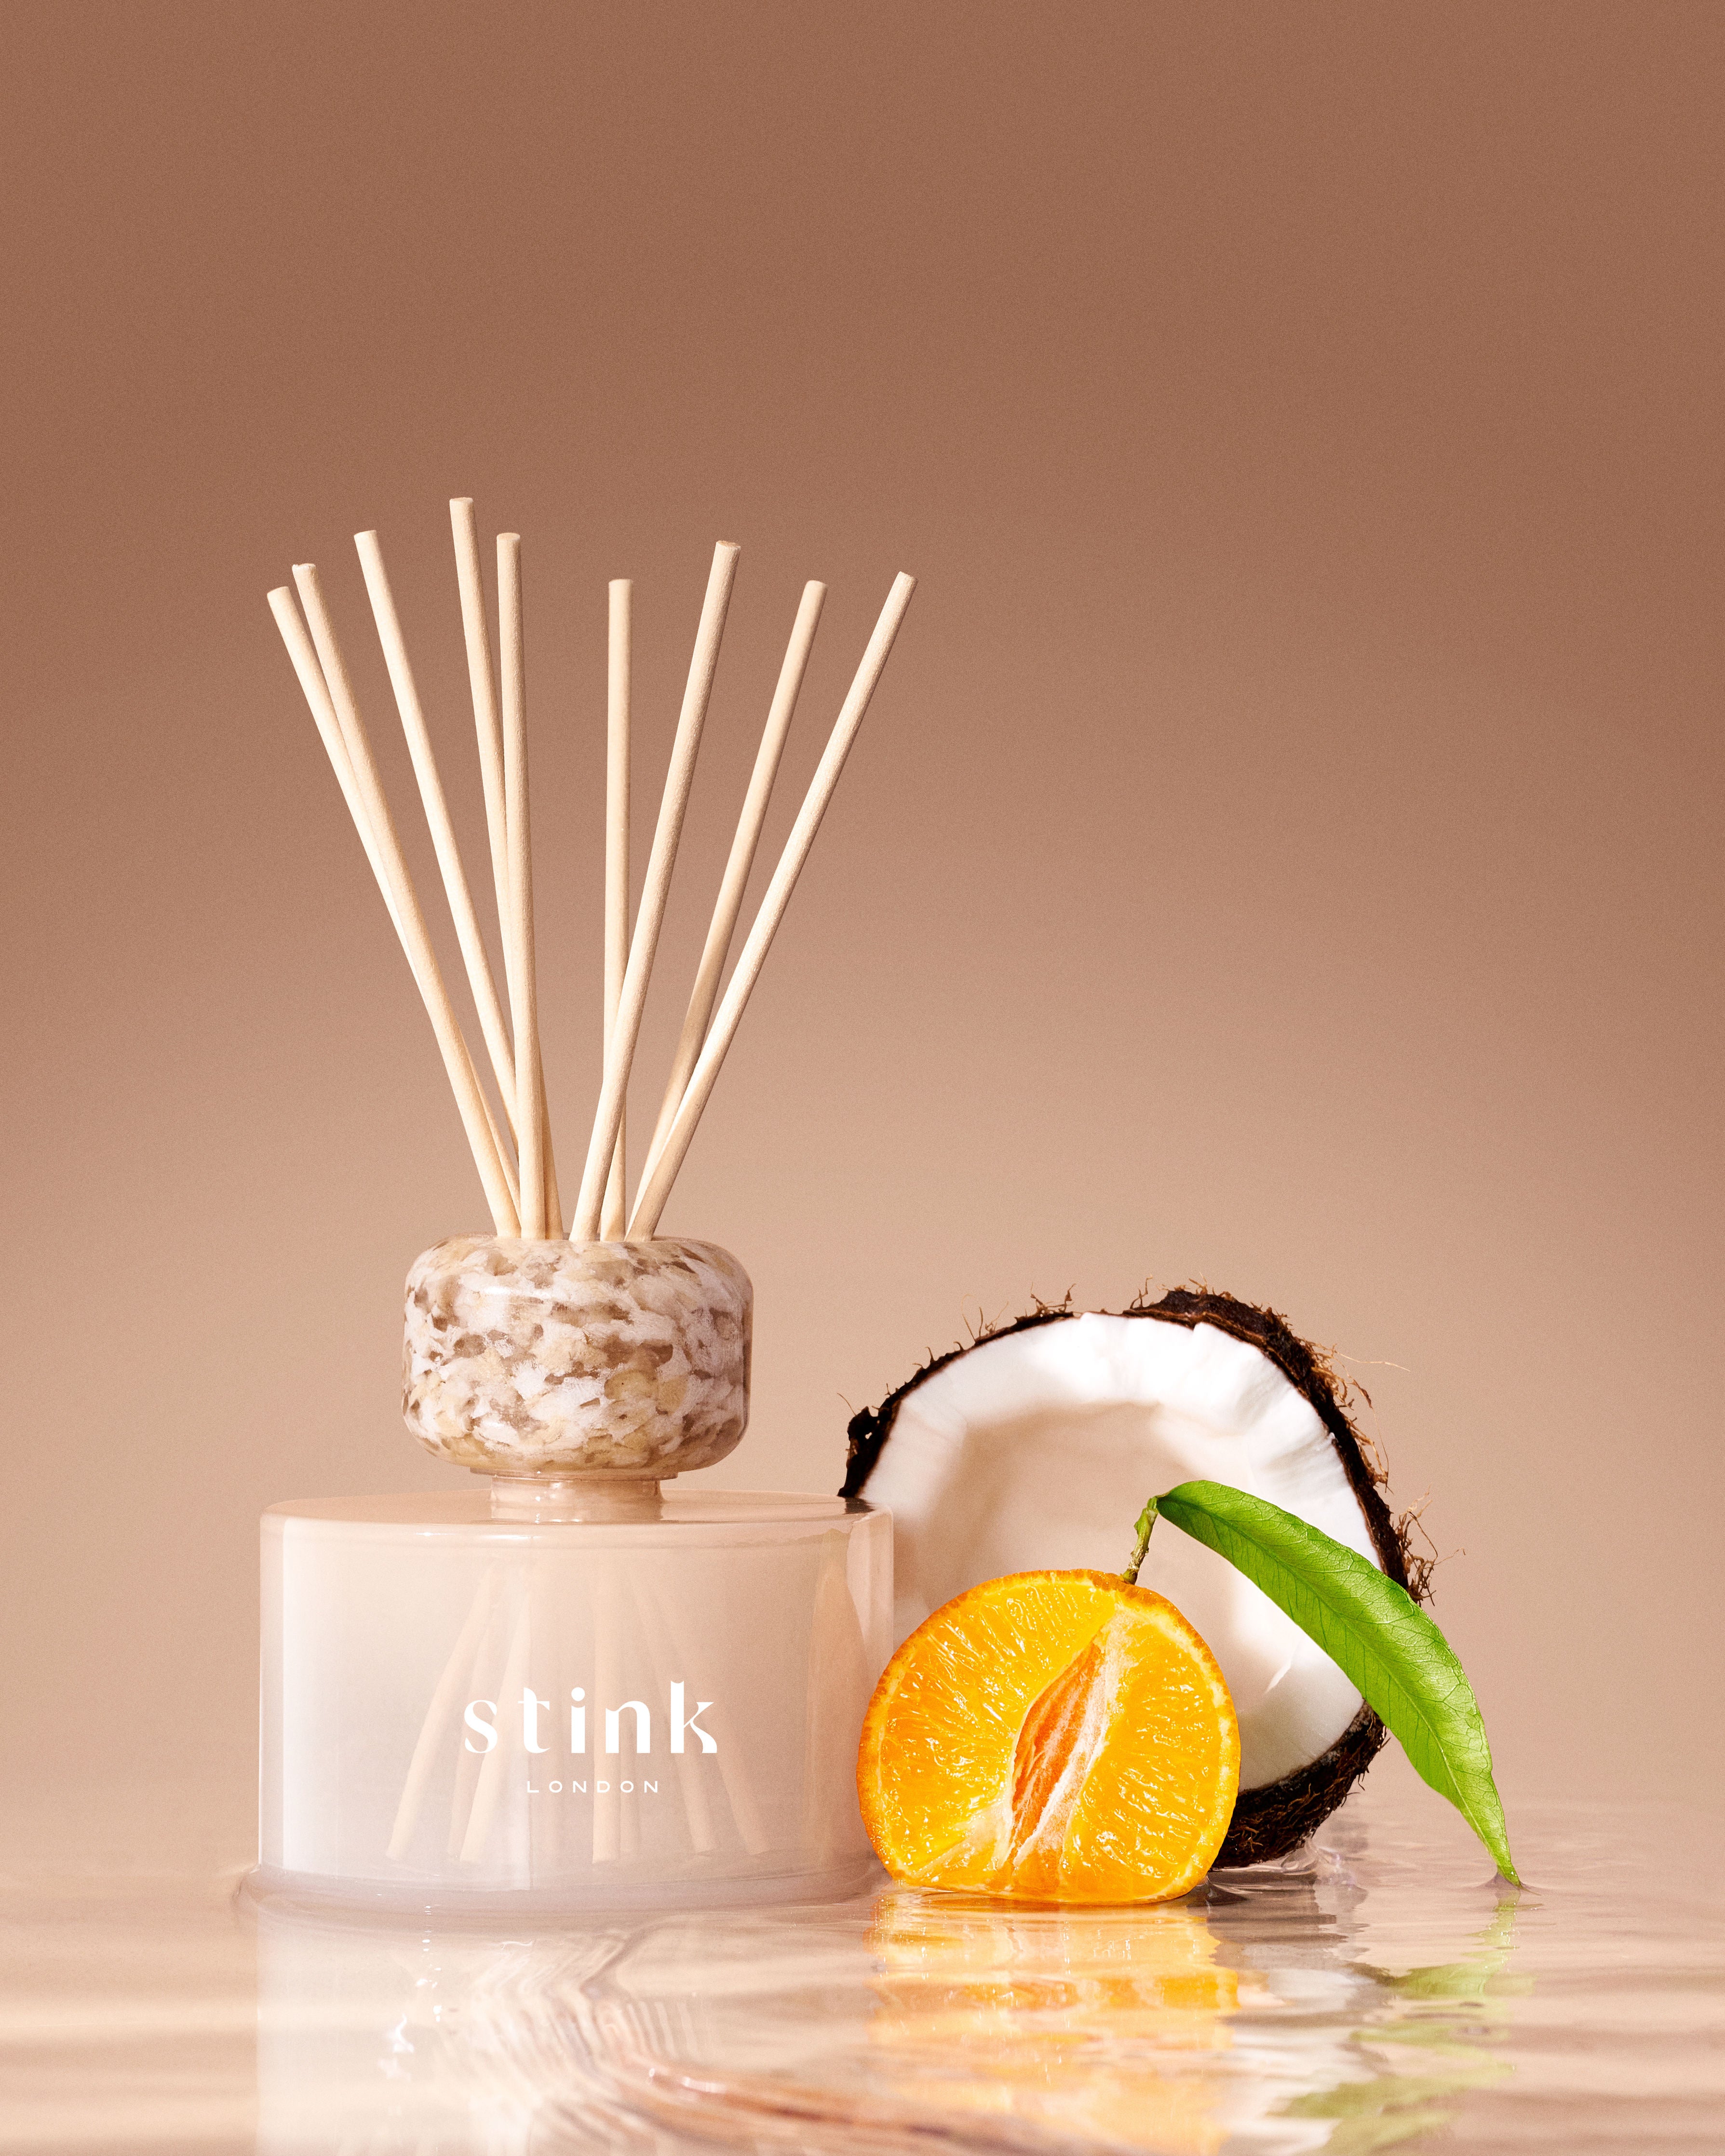 Stink London reed diffusers -  perfect gift  home fragrance subscription refill pouches, refillable bottles rattan reeds. sustainable scent labo tom ford